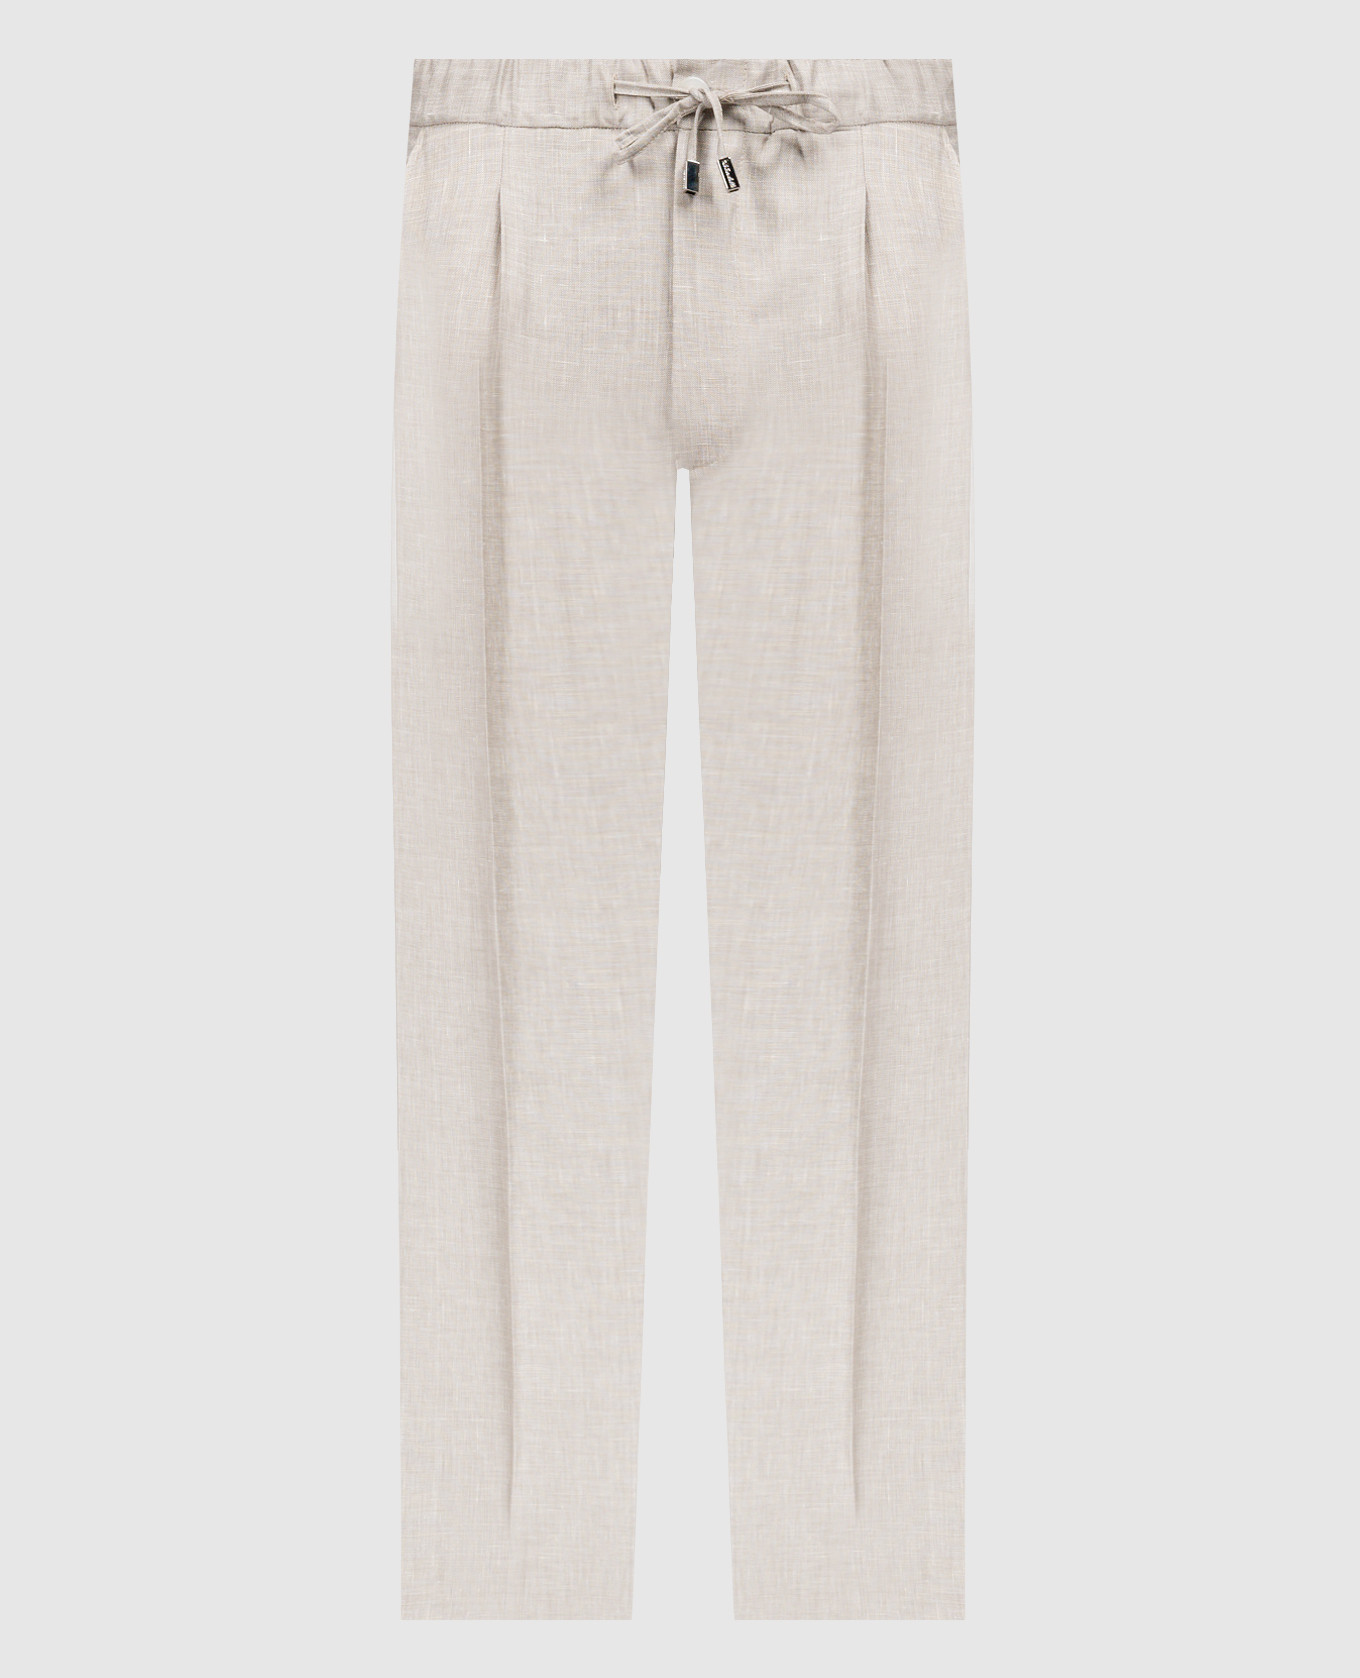 Beige pants made of linen, wool and silk